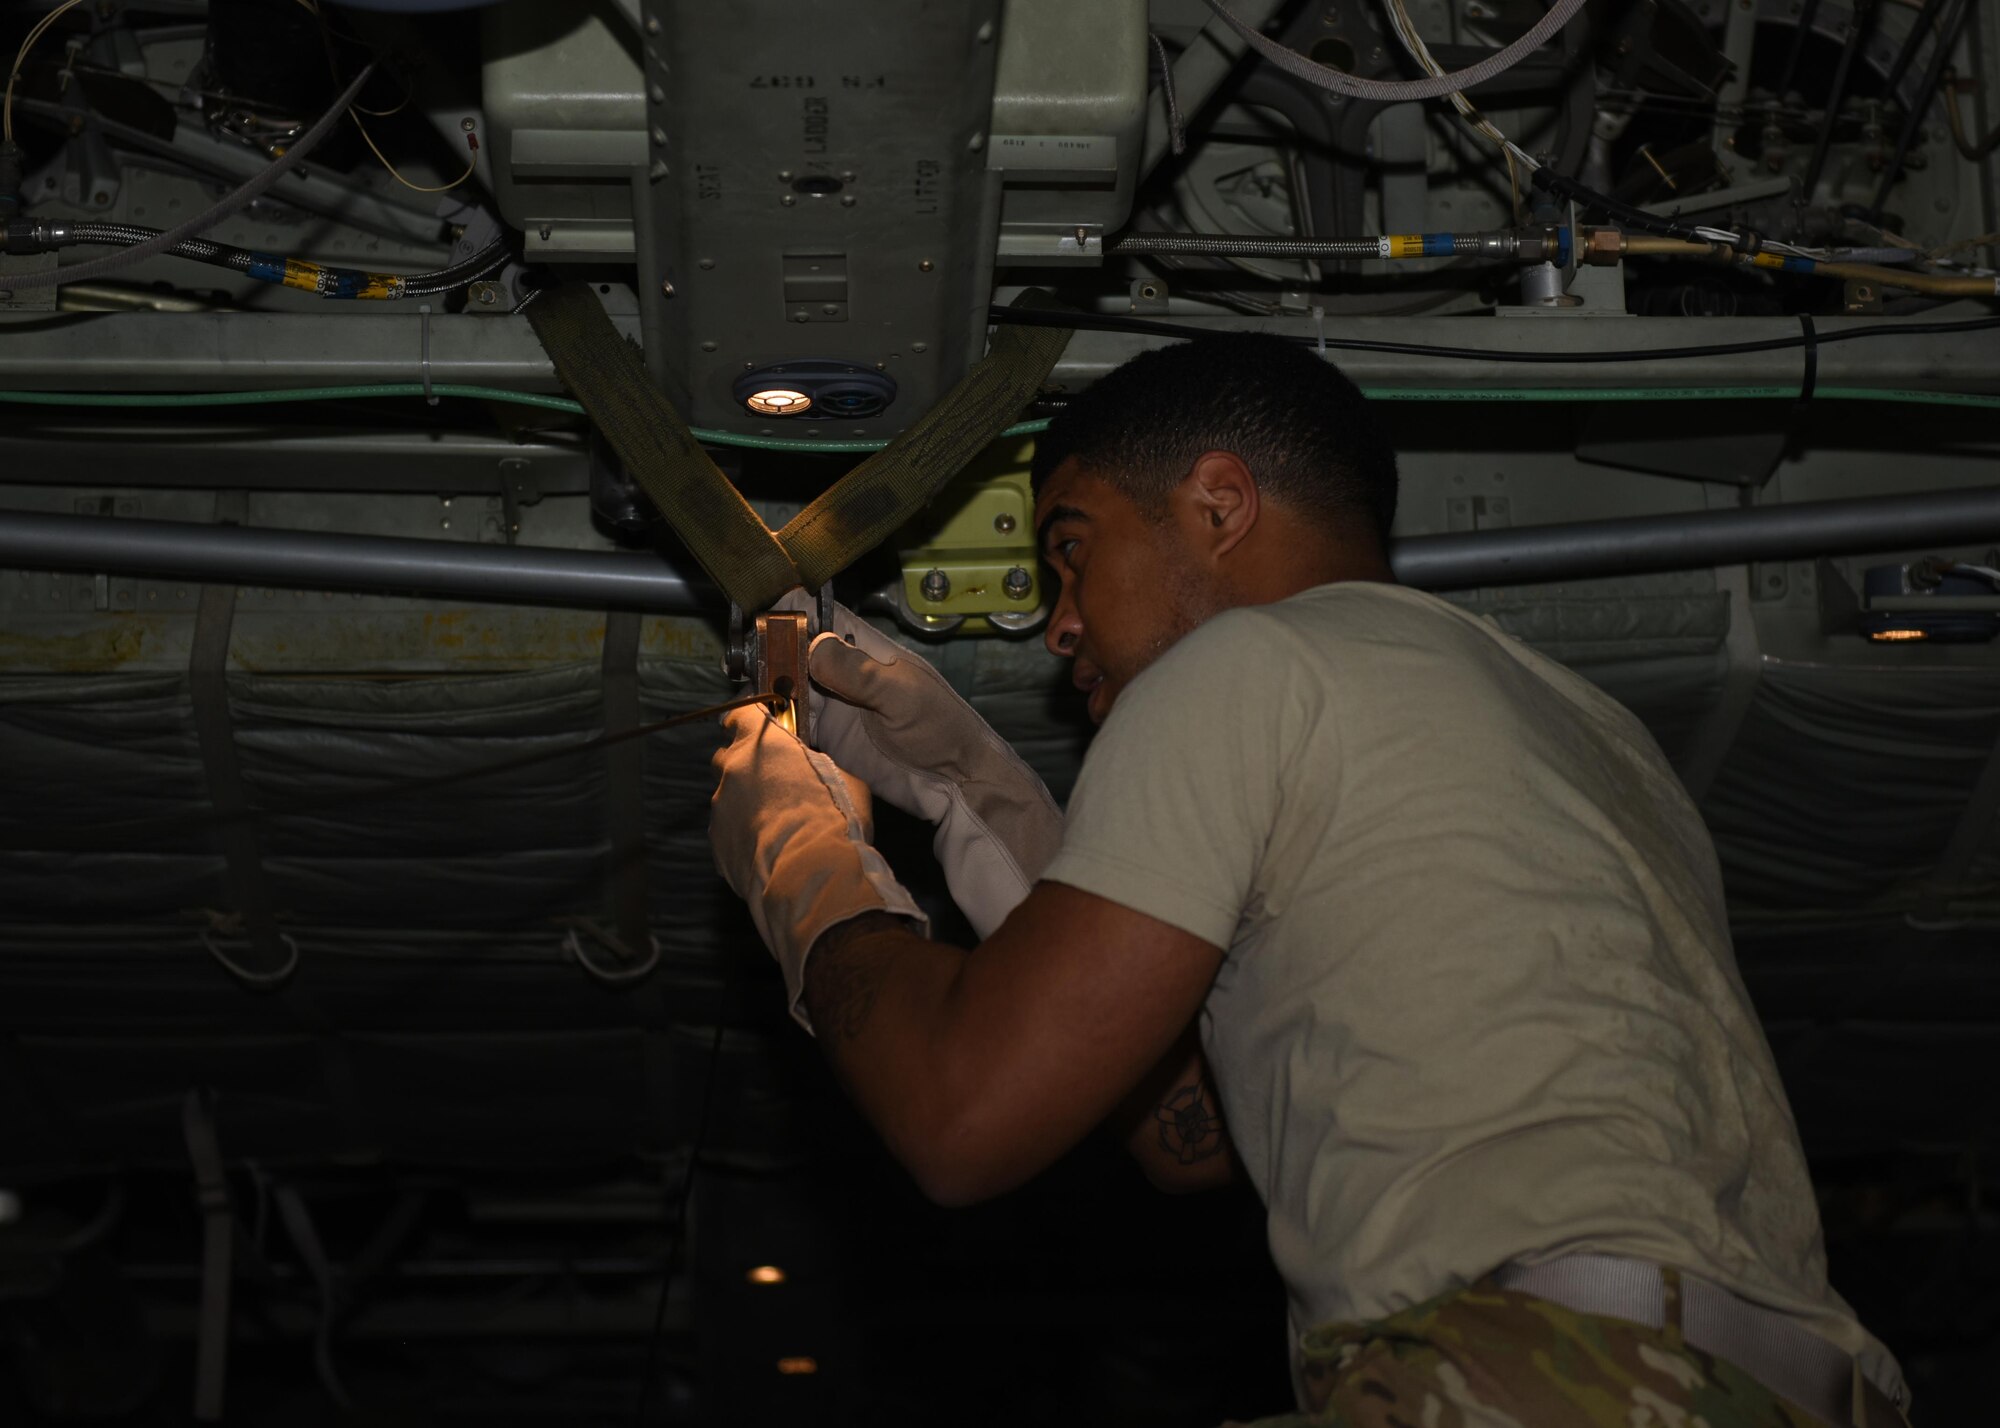 Tech. Sgt. Jimmy Sealey, a loadmaster with the 737th Expeditionary Airlift Squadron, installs a pulley that is part of the container delivery system in the cargo bay of a C-130 Hercules in preparation for an air drop at an undisclosed location in Southwest Asia, over the weekend. Providing the fuel that keeps the fight going, the 386thAir Expeditionary Wing has delivered more than 80 tons of food, water and other supplies to various supported forces throughout the U.S. Air Forces Central Command area of responsibility in support of Combined Joint Task Force - Operation Inherent Resolve ground troops. (U.S. Air Force photo/Tech. Sgt. Jonathan Hehnly)